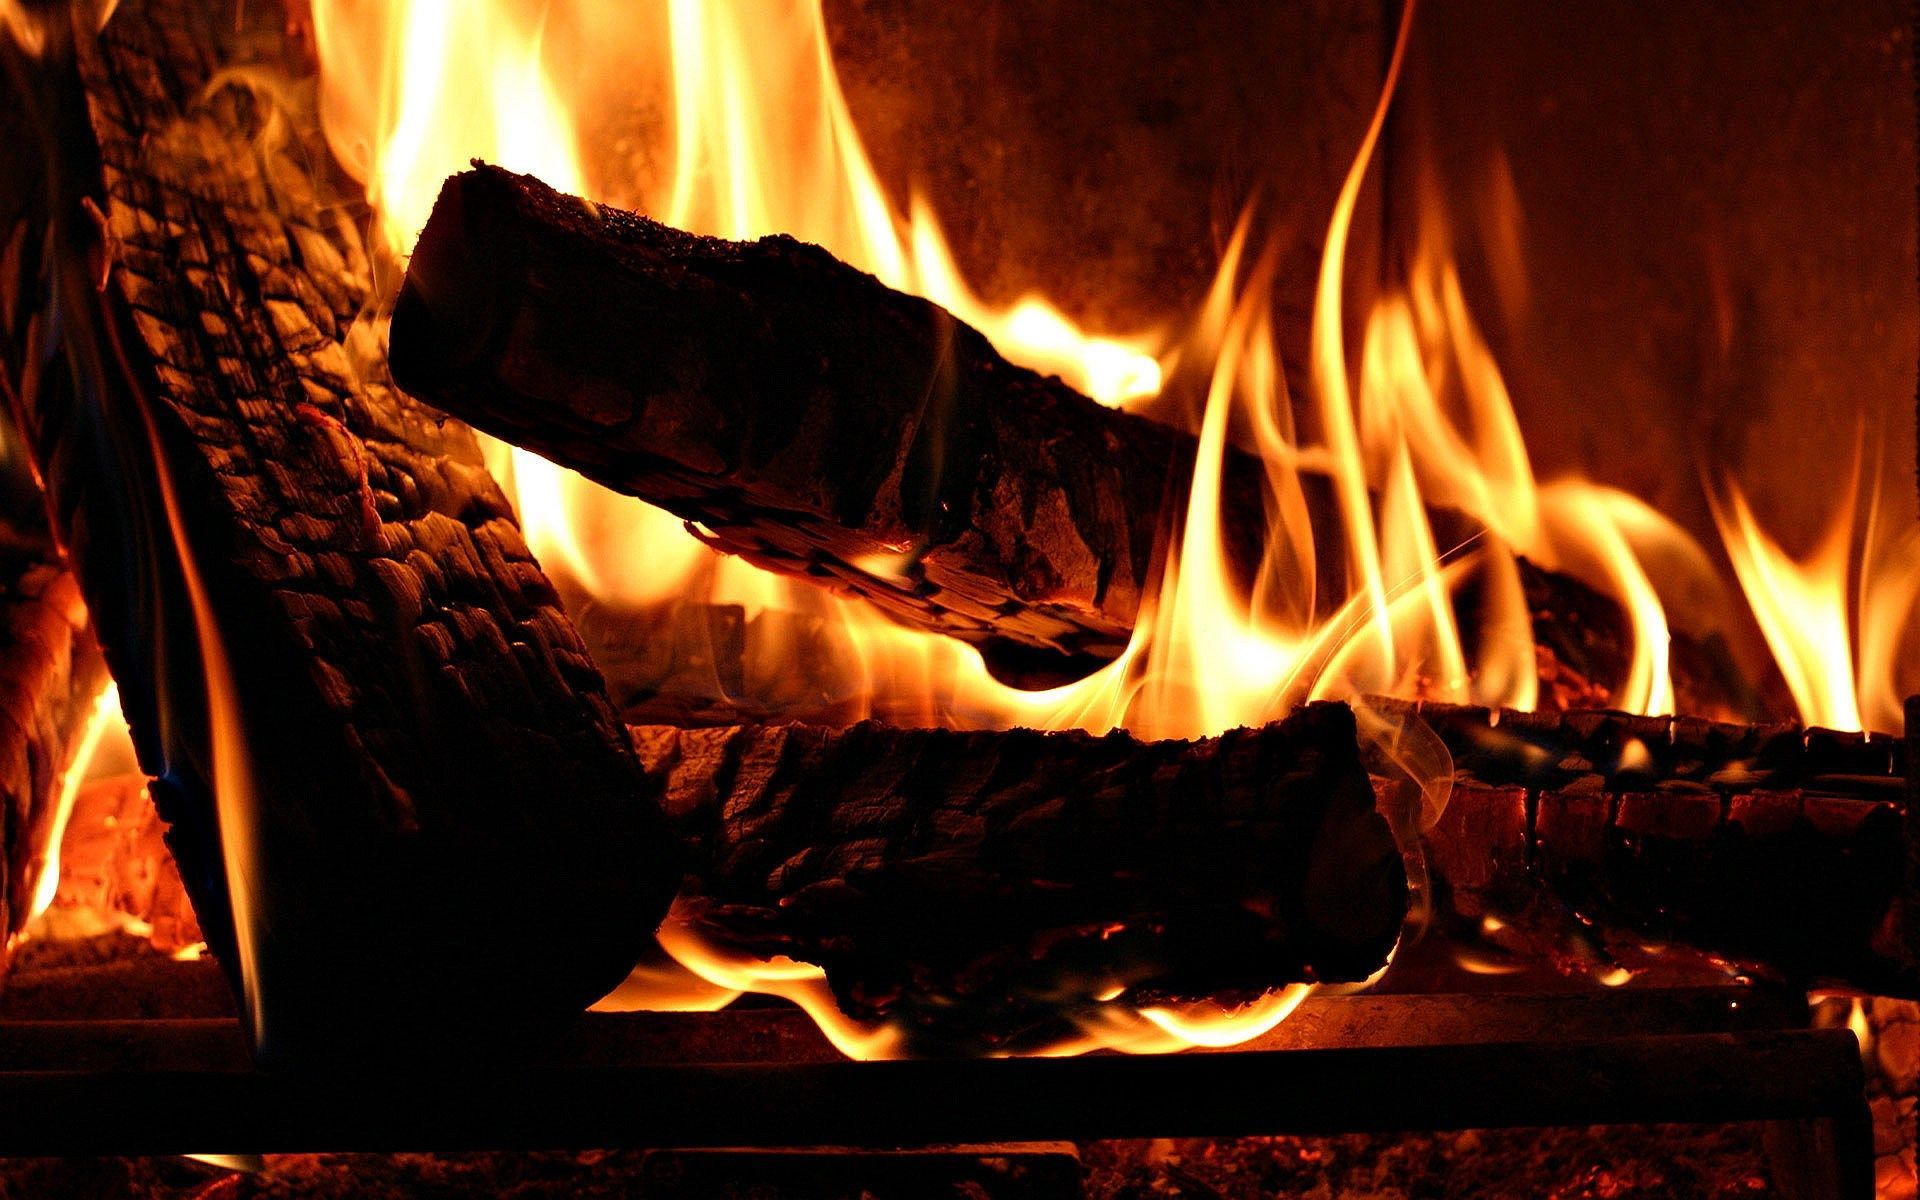 fire free computer wallpaper download. Wood burning stove, Fireplace picture, Fireplace